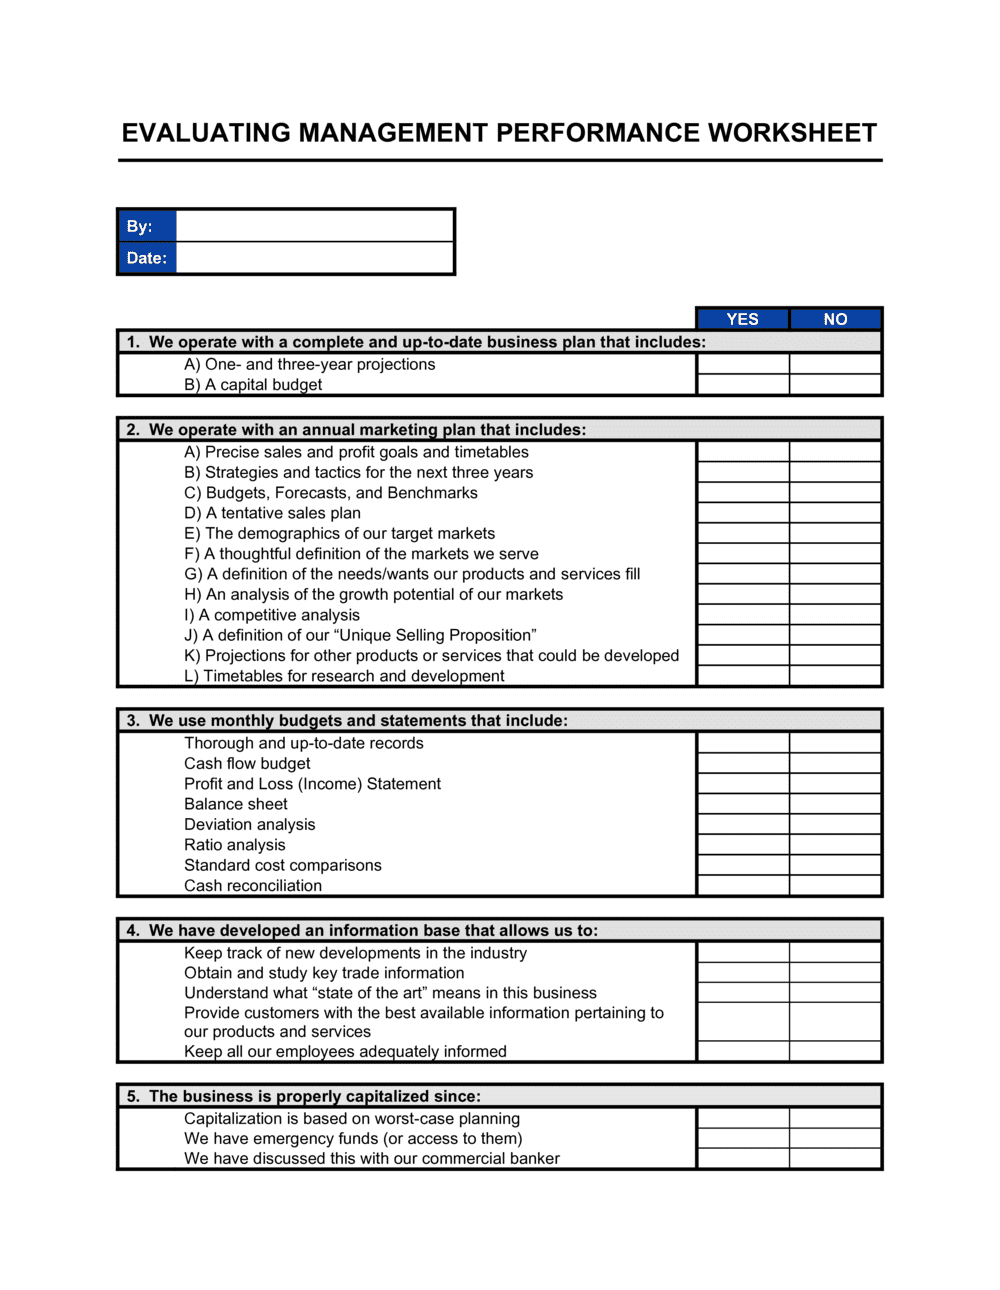 Business-in-a-Box's Worksheet Evaluating Management Performance Template